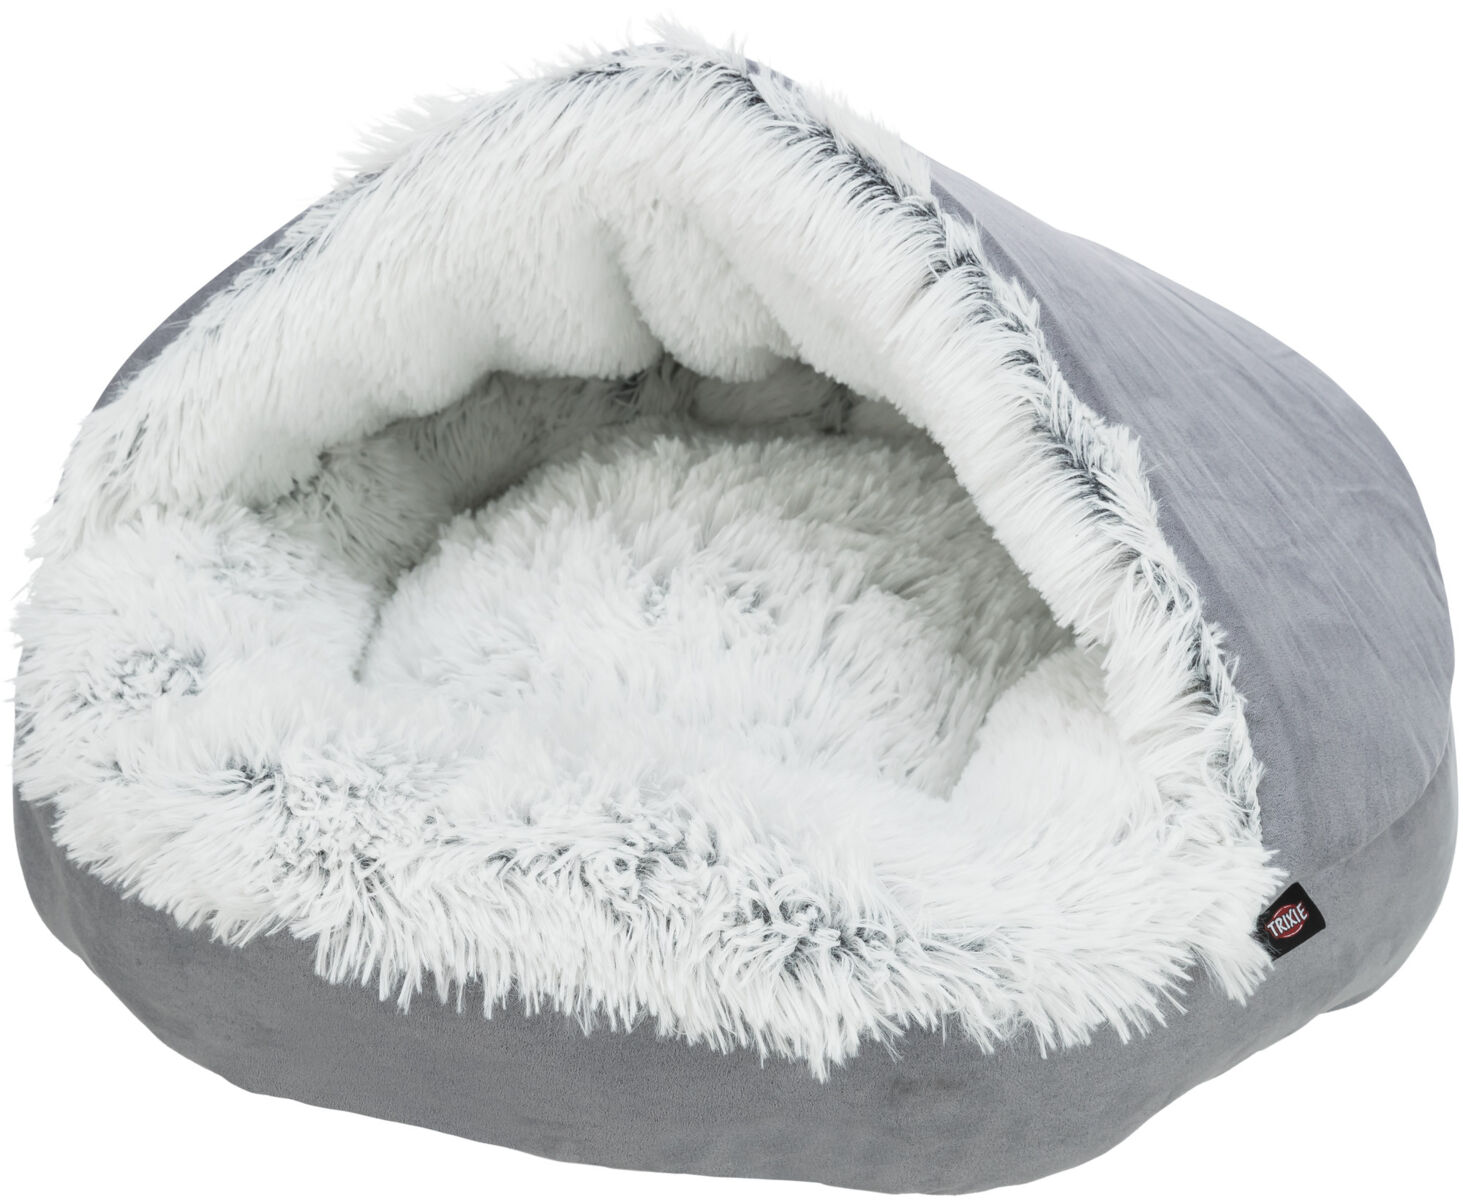 Cave bed Harvey round 